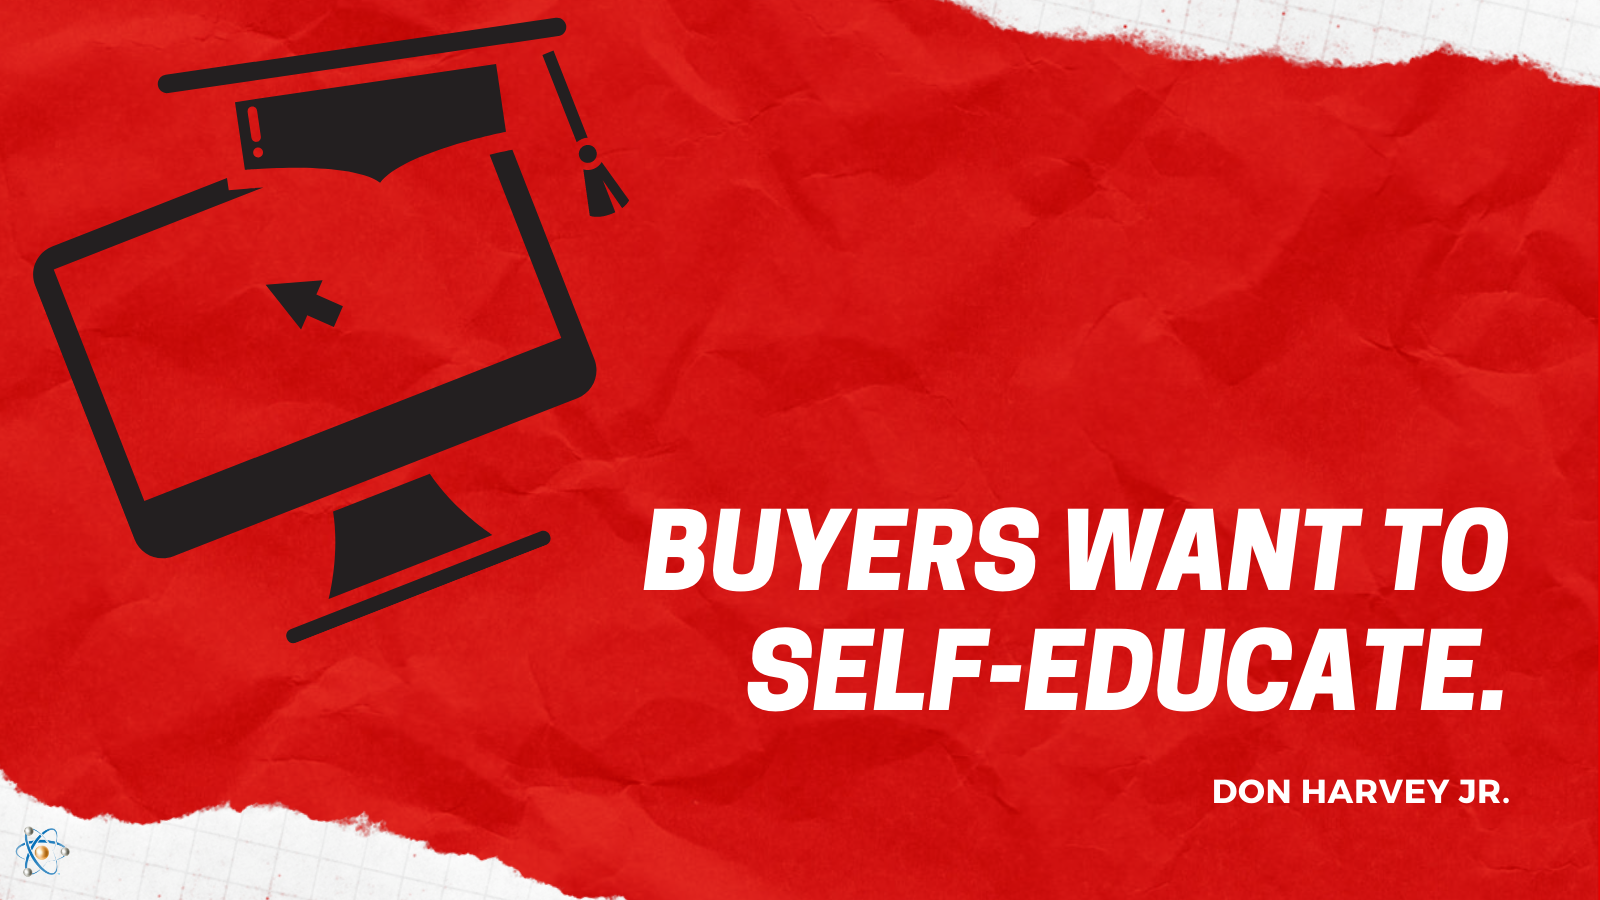 Buyers want to self-educate don harvey jr quote